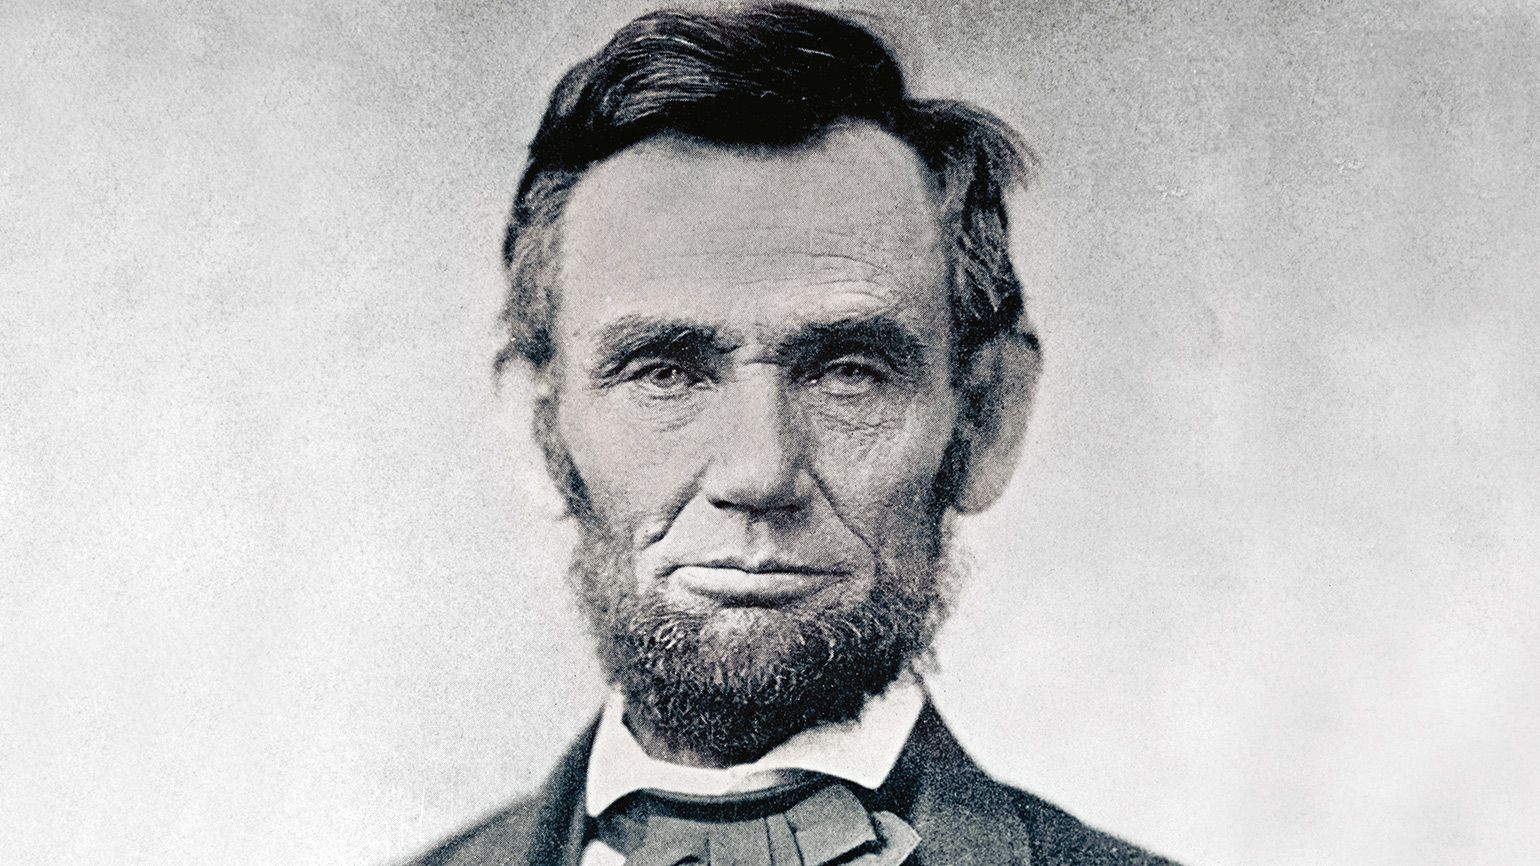 Abraham Lincoln, Biography, Childhood, Quotes, Death, & Facts